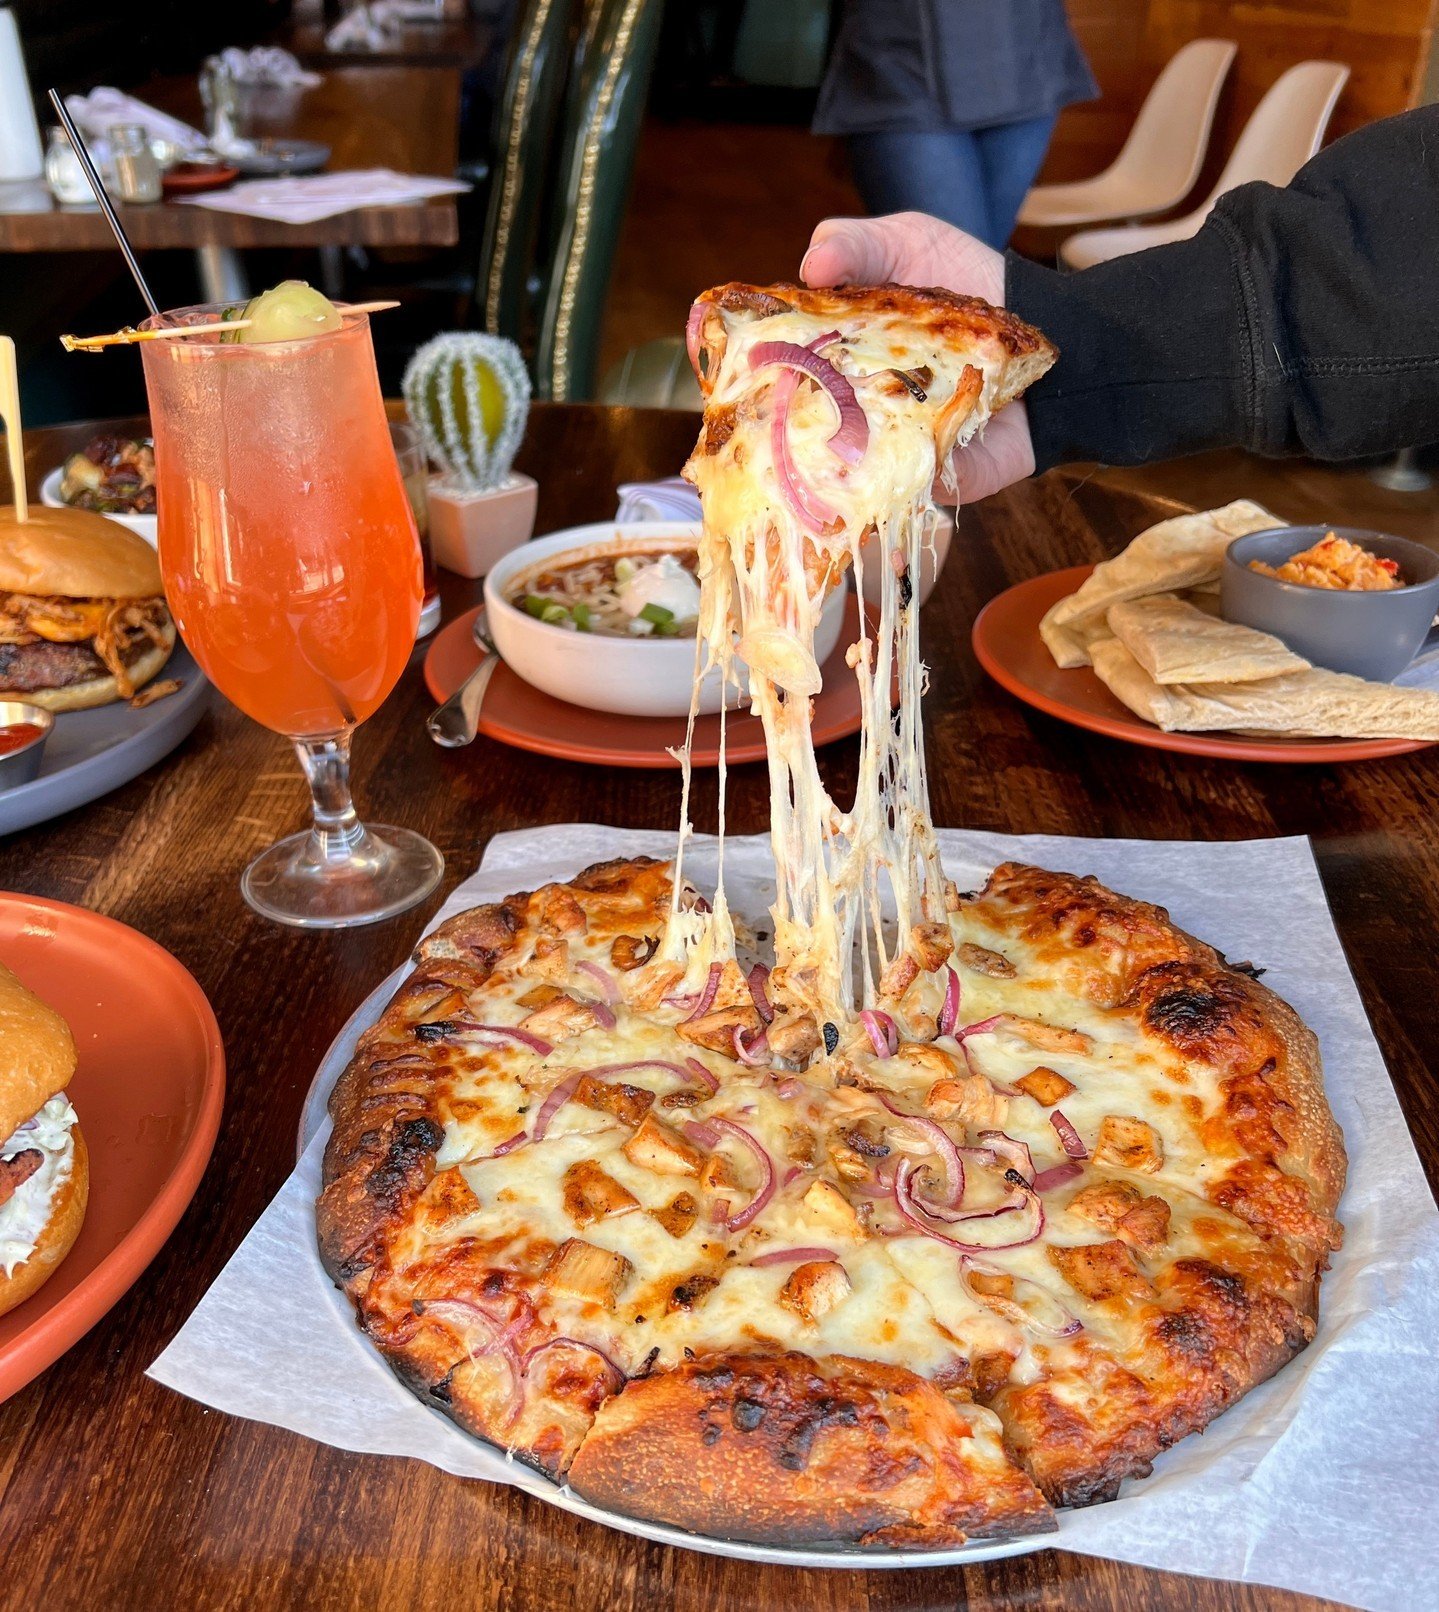 When the cheese pull looks this good, you know your pizza is going to be 🔥

Pictured is our barbecue chicken pizza made with bbq sauce, grilled brined chicken breast, sliced red onion, mozzarella &amp; white cheddar. 

We're open for lunch and dinne